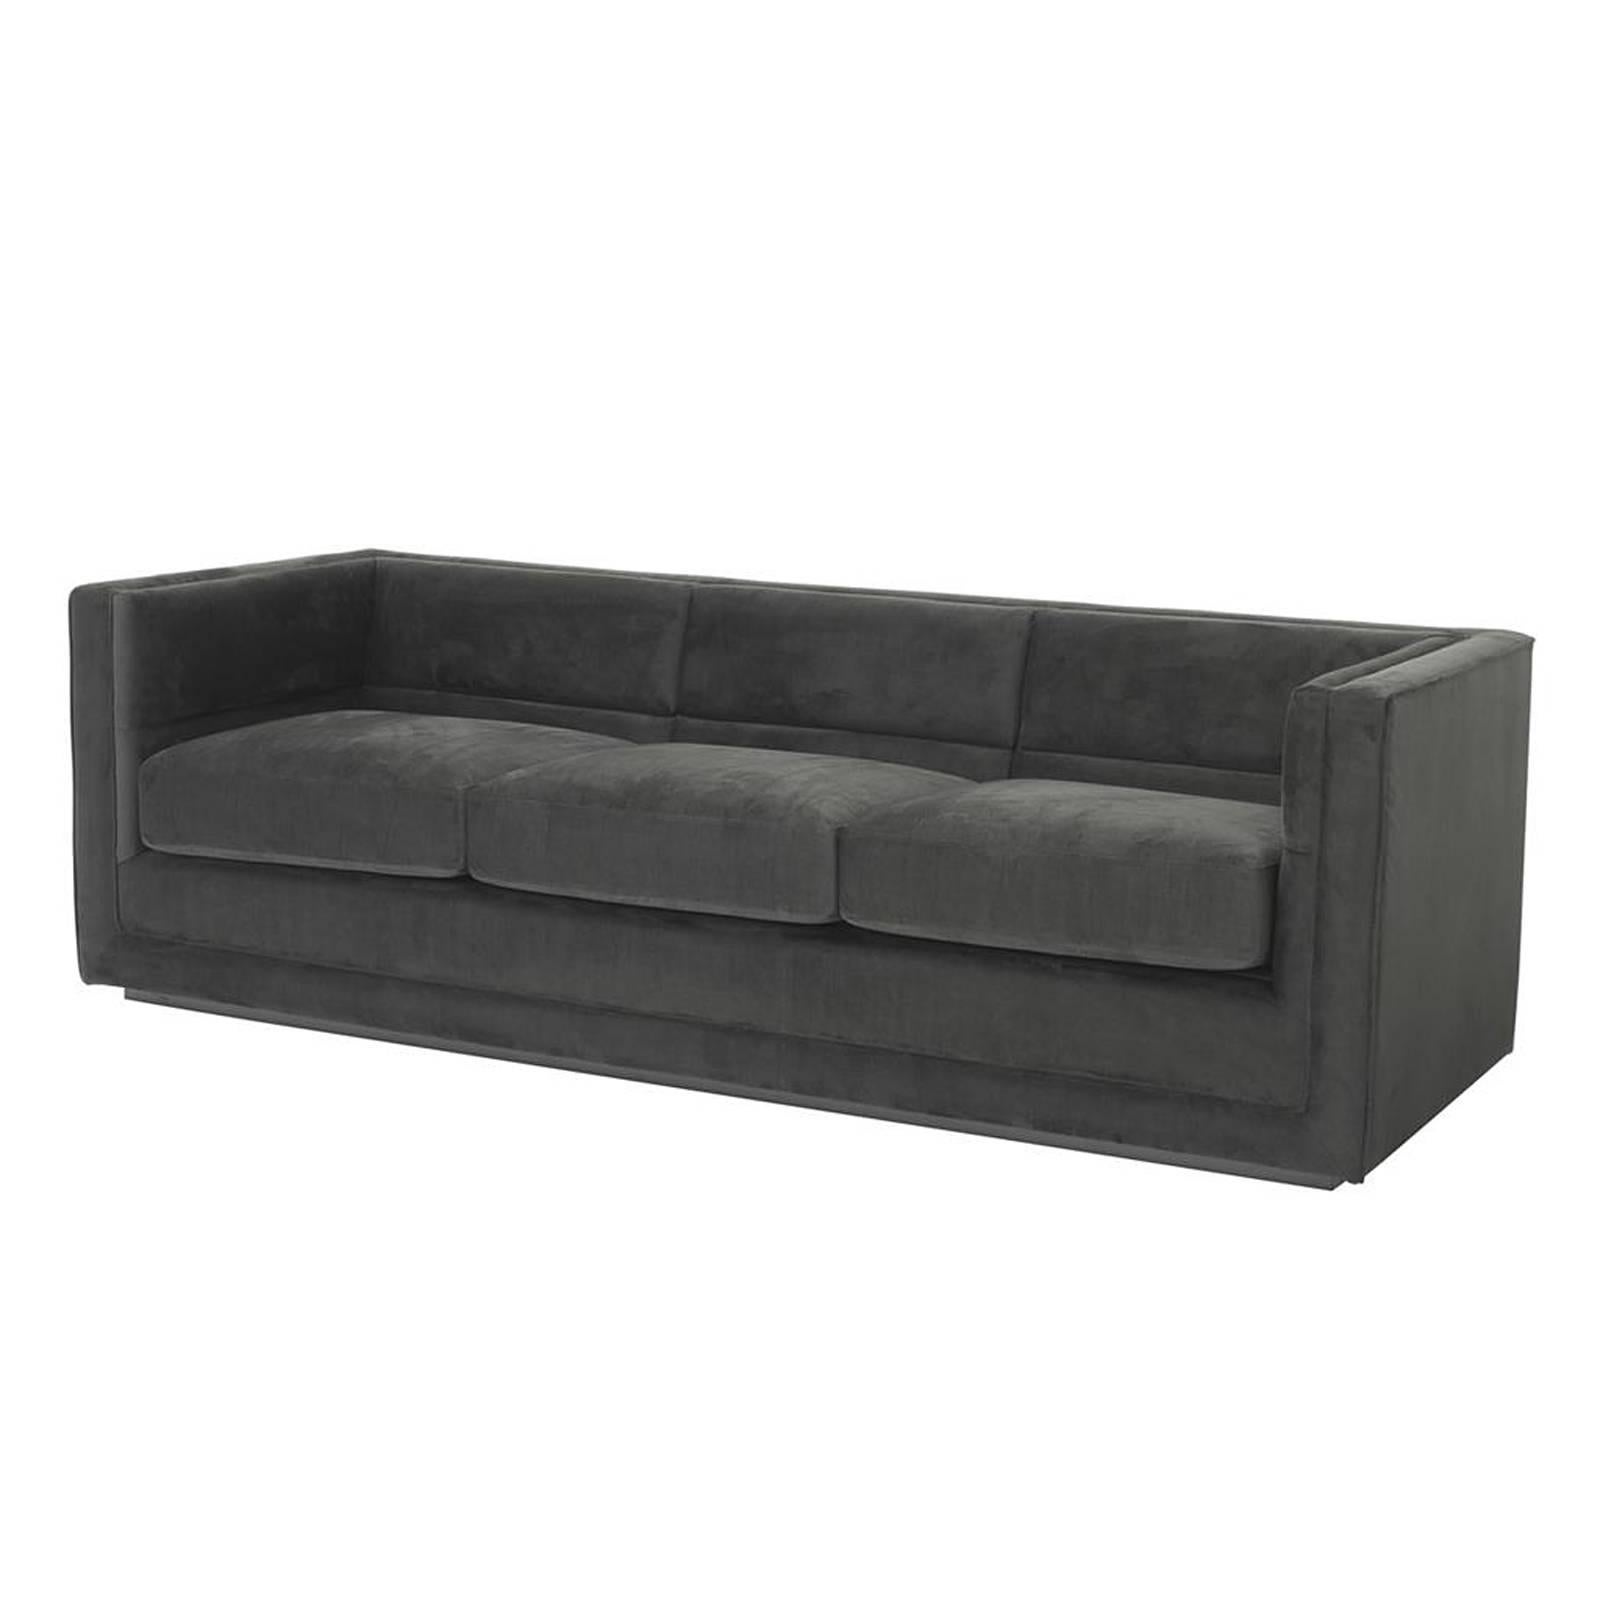 Becker Sofa with Anthracite Grey Fabric